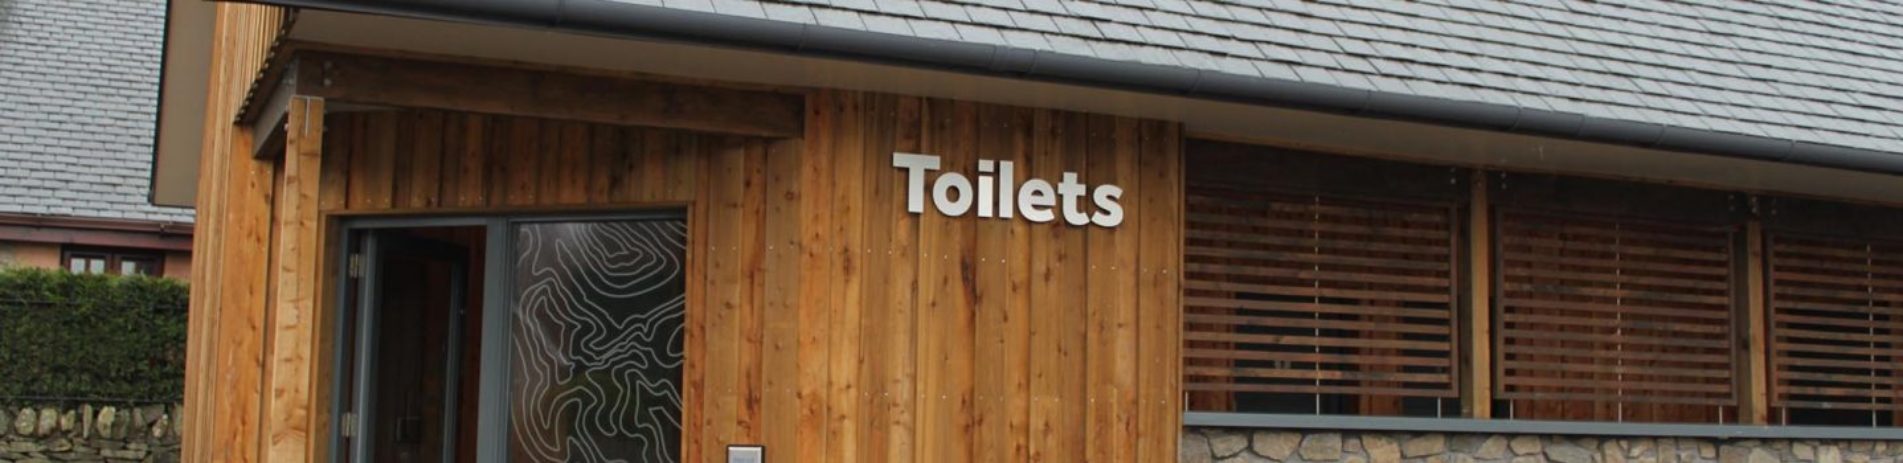 toilet-block-at-luss-village-wooden-exterior-with-sleet-roof-and-stylized-hill-contours-graphic-on-glass-doors